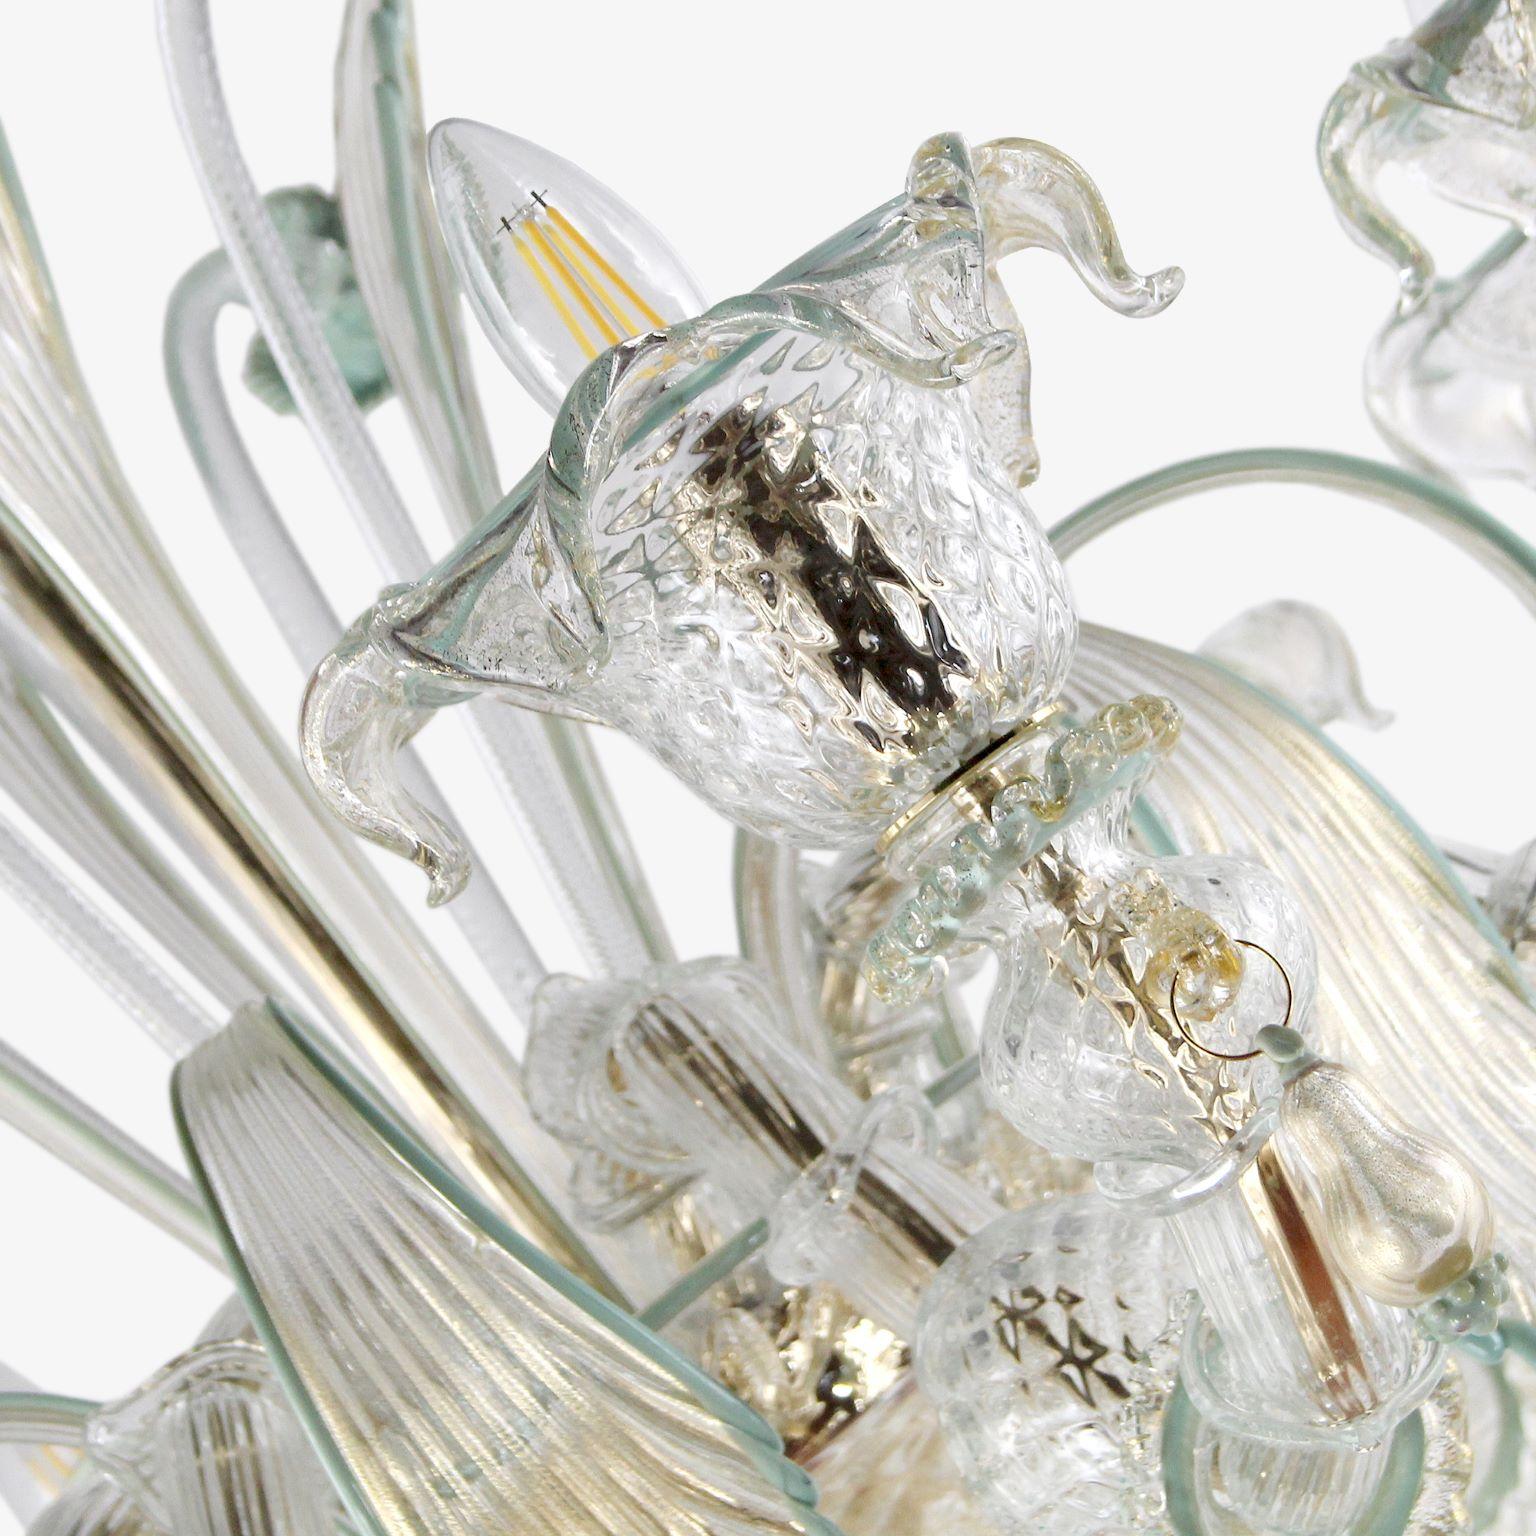 Rezzonico chandelier 8 arms, crystal Murano glass, with gold, green and grey color particulars by Multiforme.
This artistic glass chandelier is an elegant and delicate lighting work, colored with pastel tones. The structure is a combination of